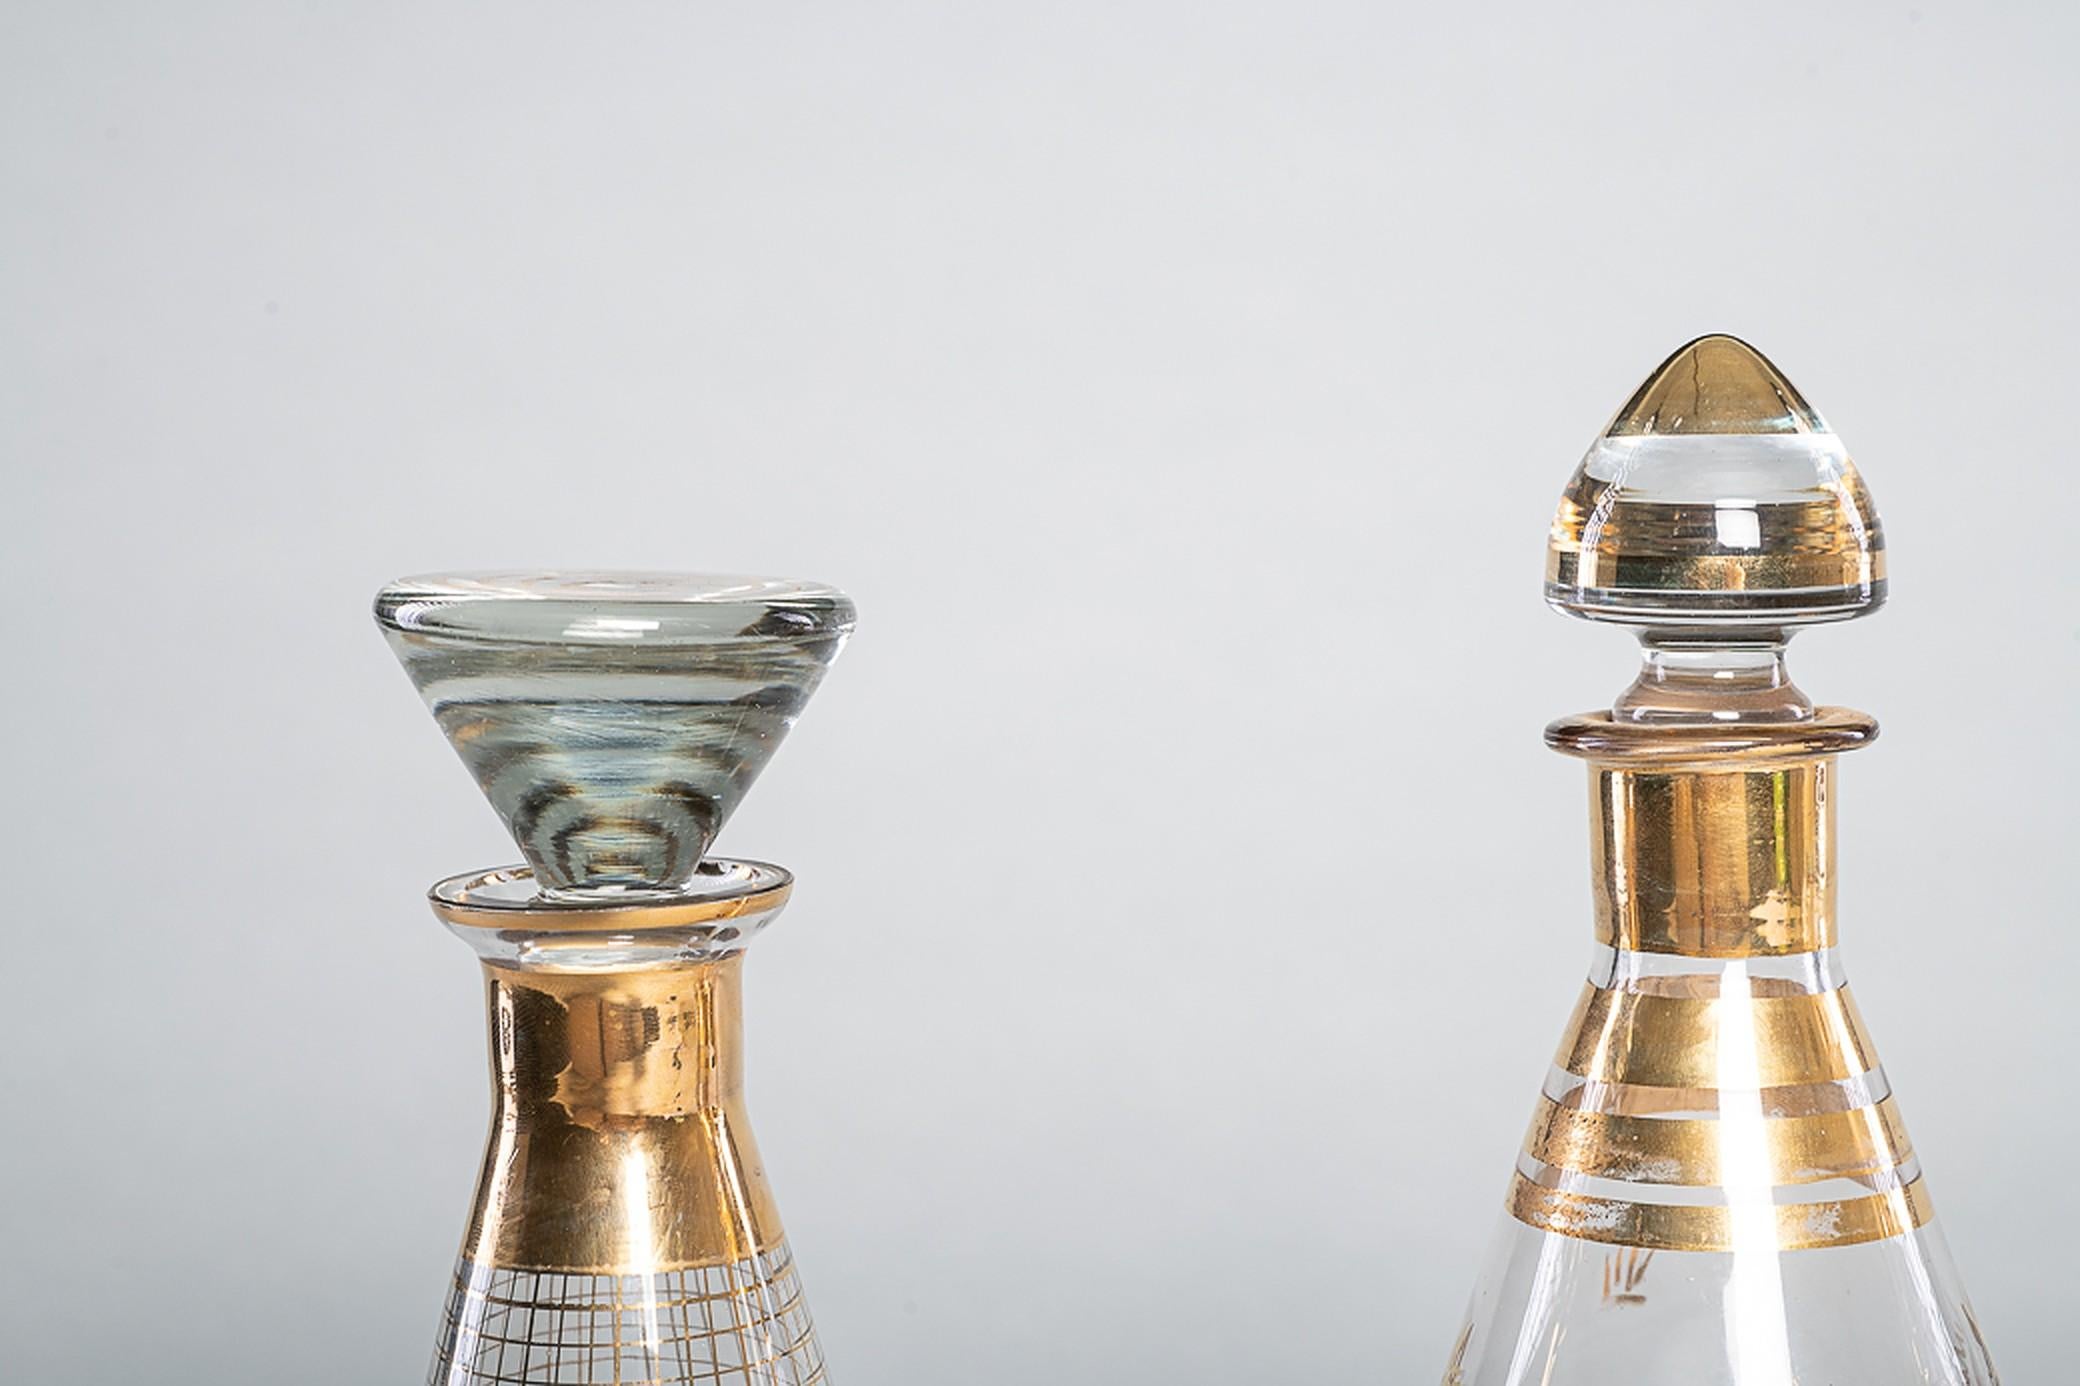 Glass liquor carafe, with gold finish / linear decoration.